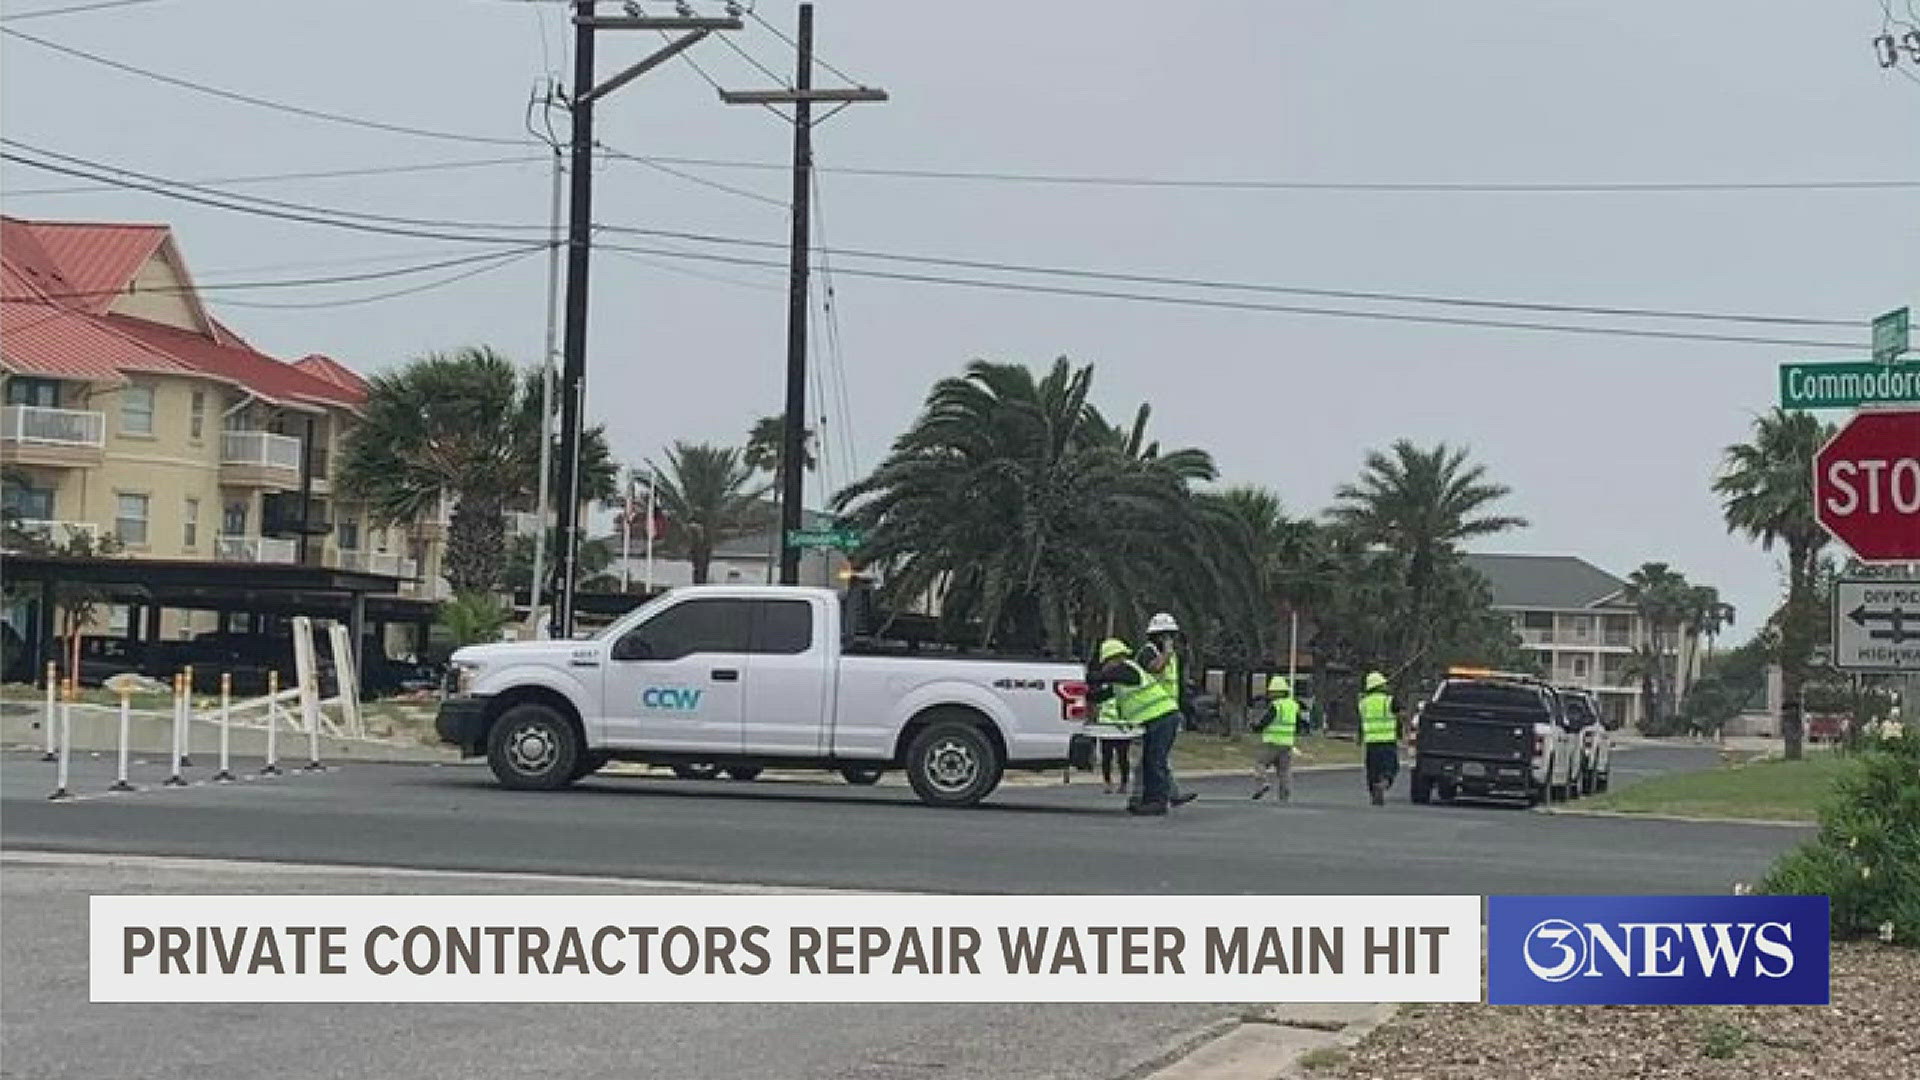 The independent contractors were able to repair the water line by Tuesday evening as planned.